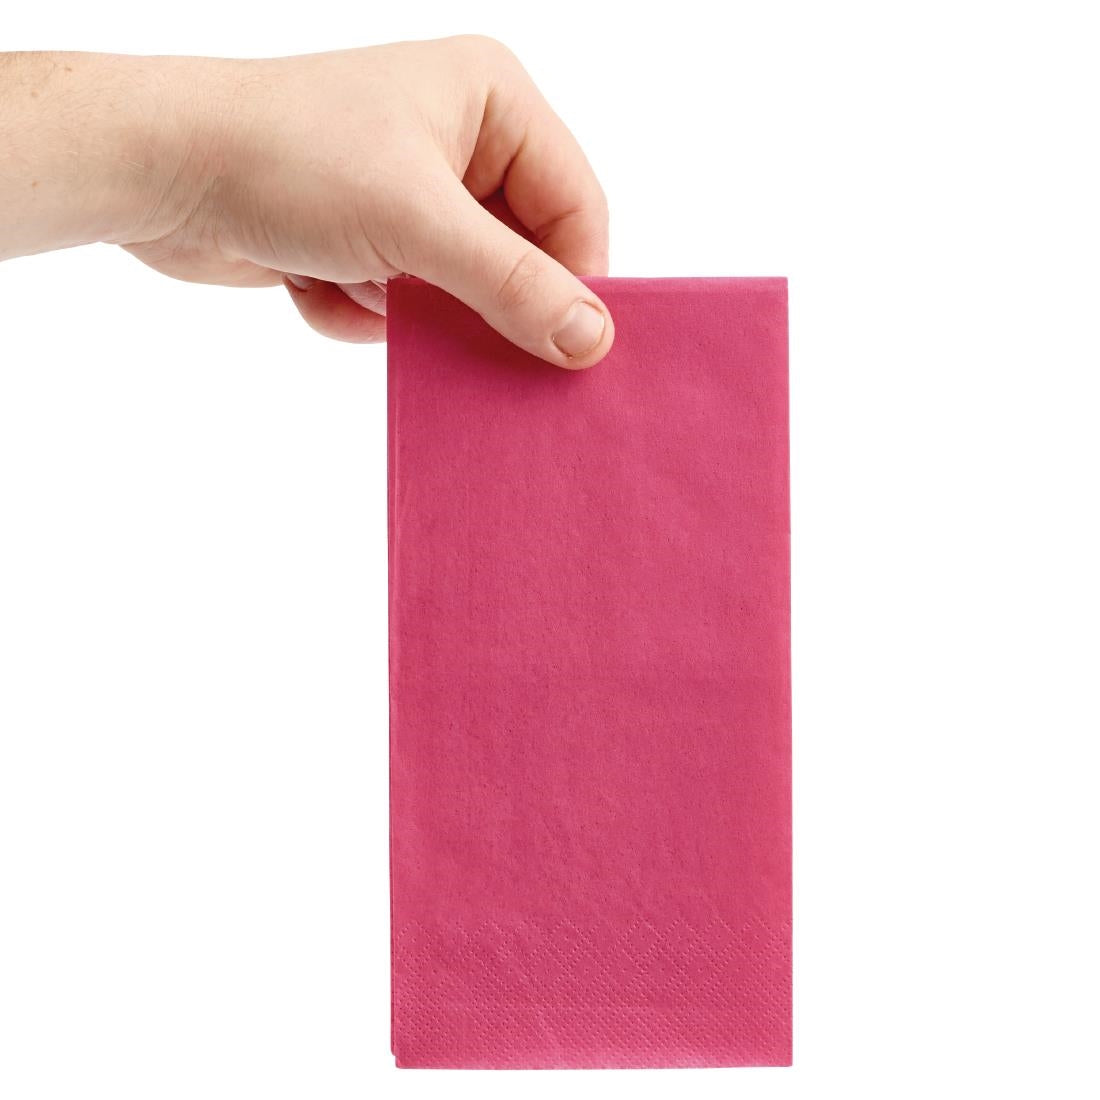 FE230 Fiesta Lunch Napkins Deep Pink 330mm (Pack of 2000) JD Catering Equipment Solutions Ltd